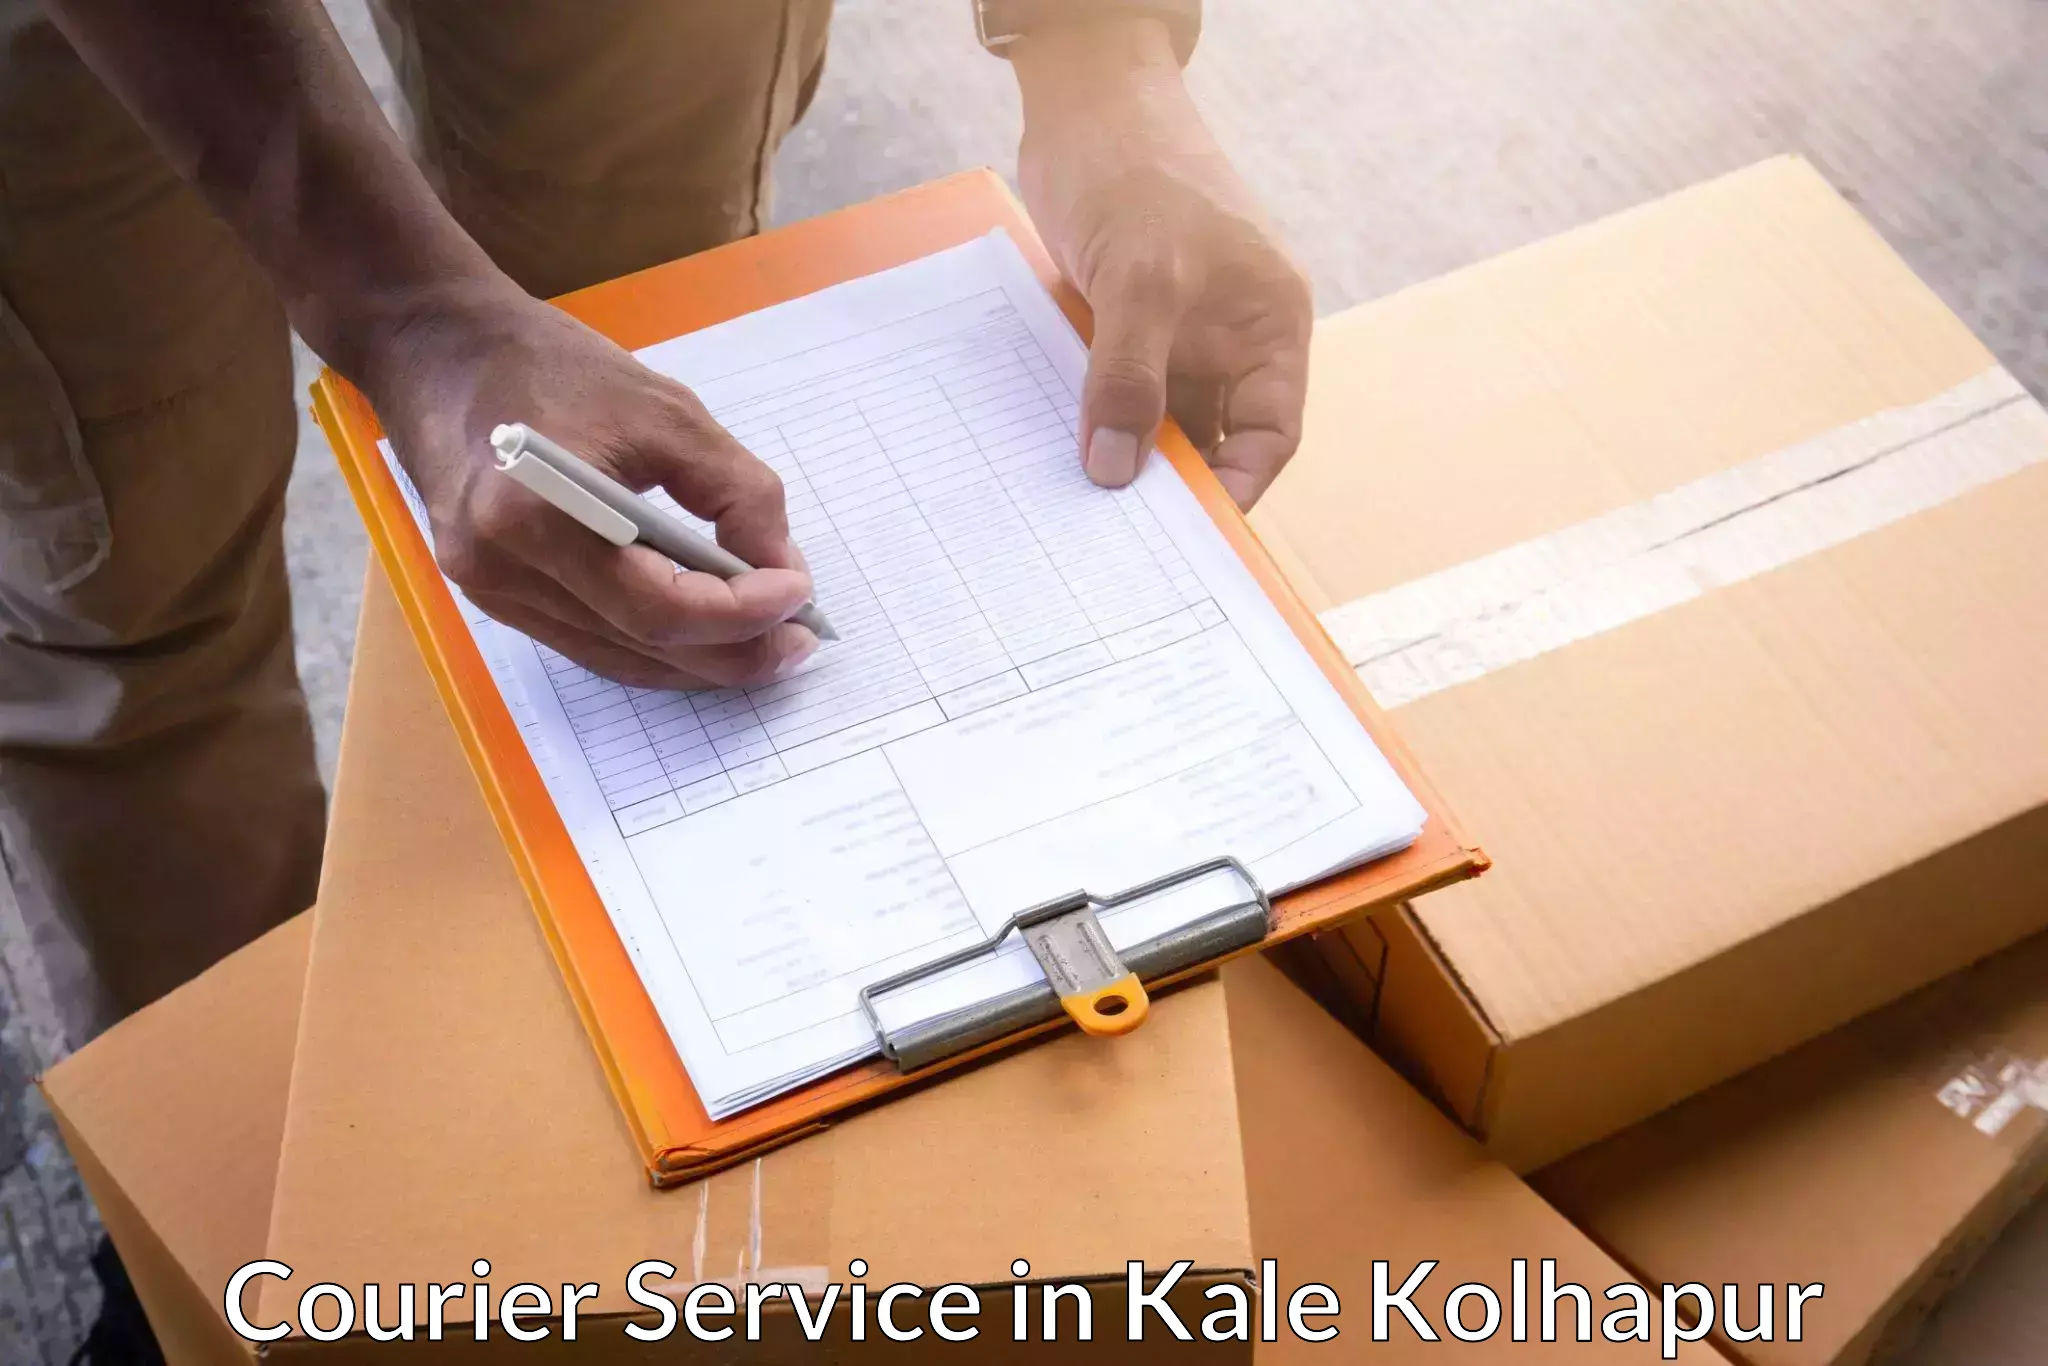 Courier services in Kale Kolhapur